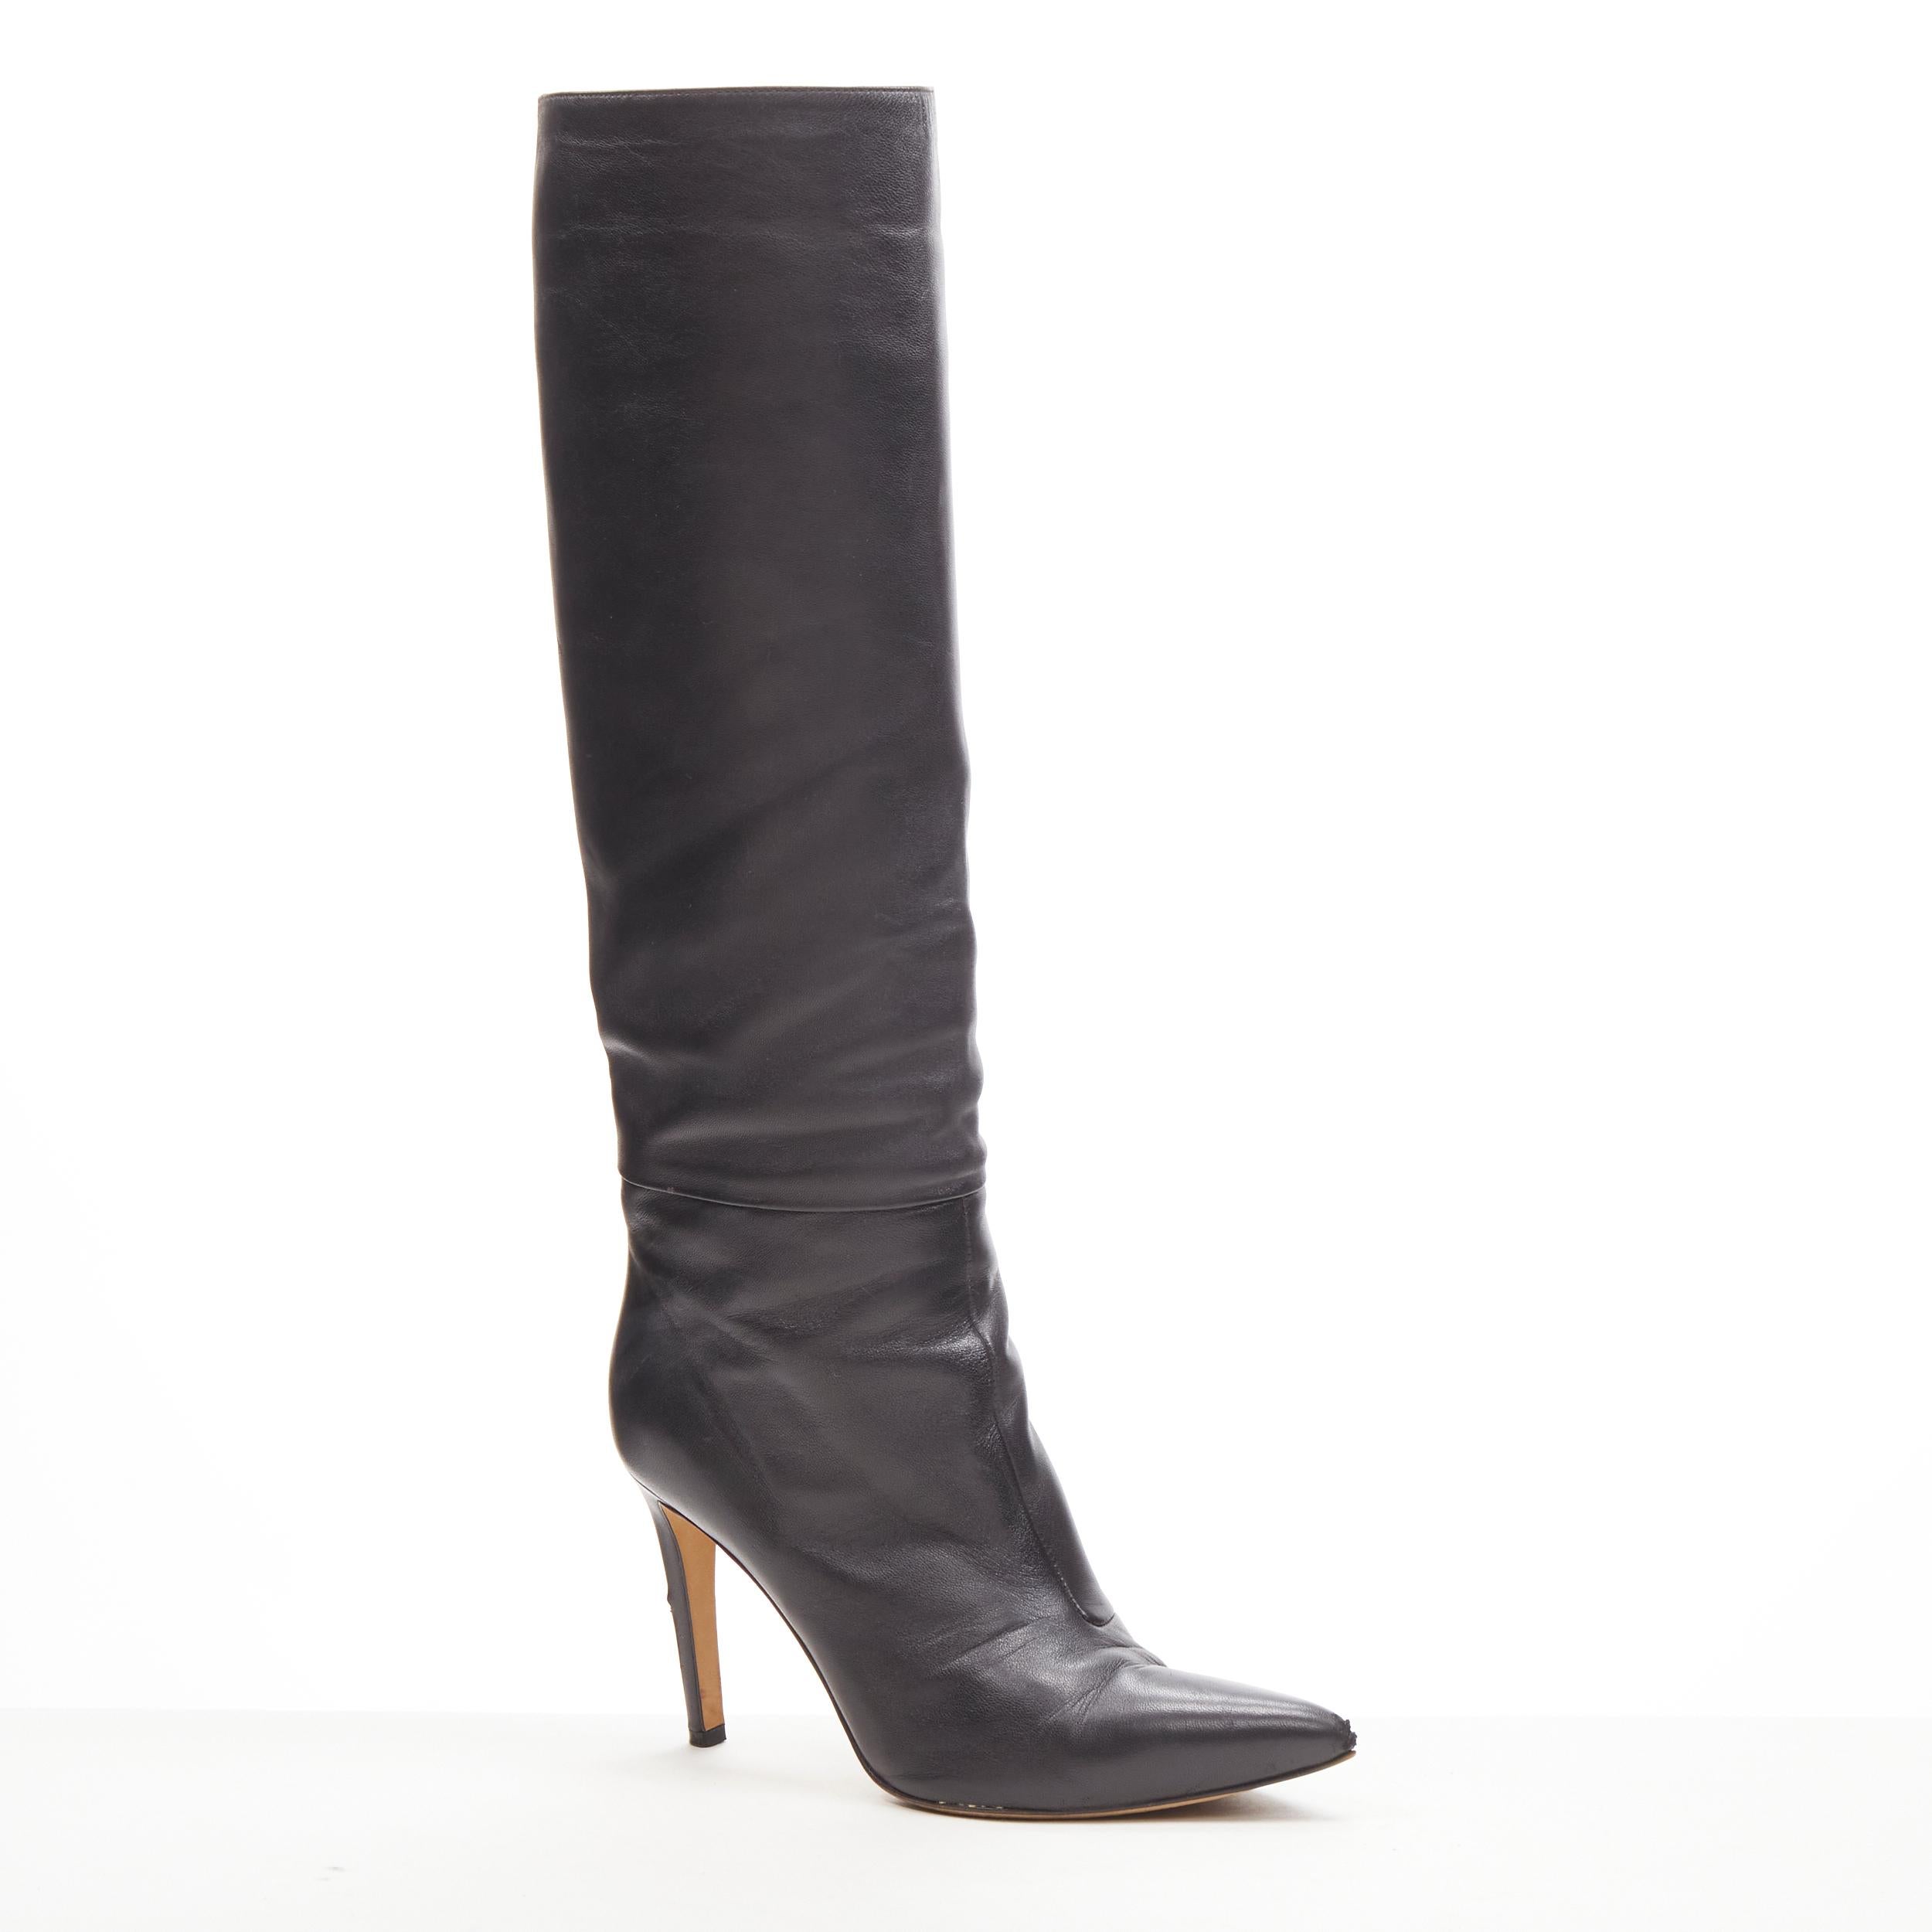 Black SERGIO ROSSI black leather point toe pull on high heel boots EU38 For Sale